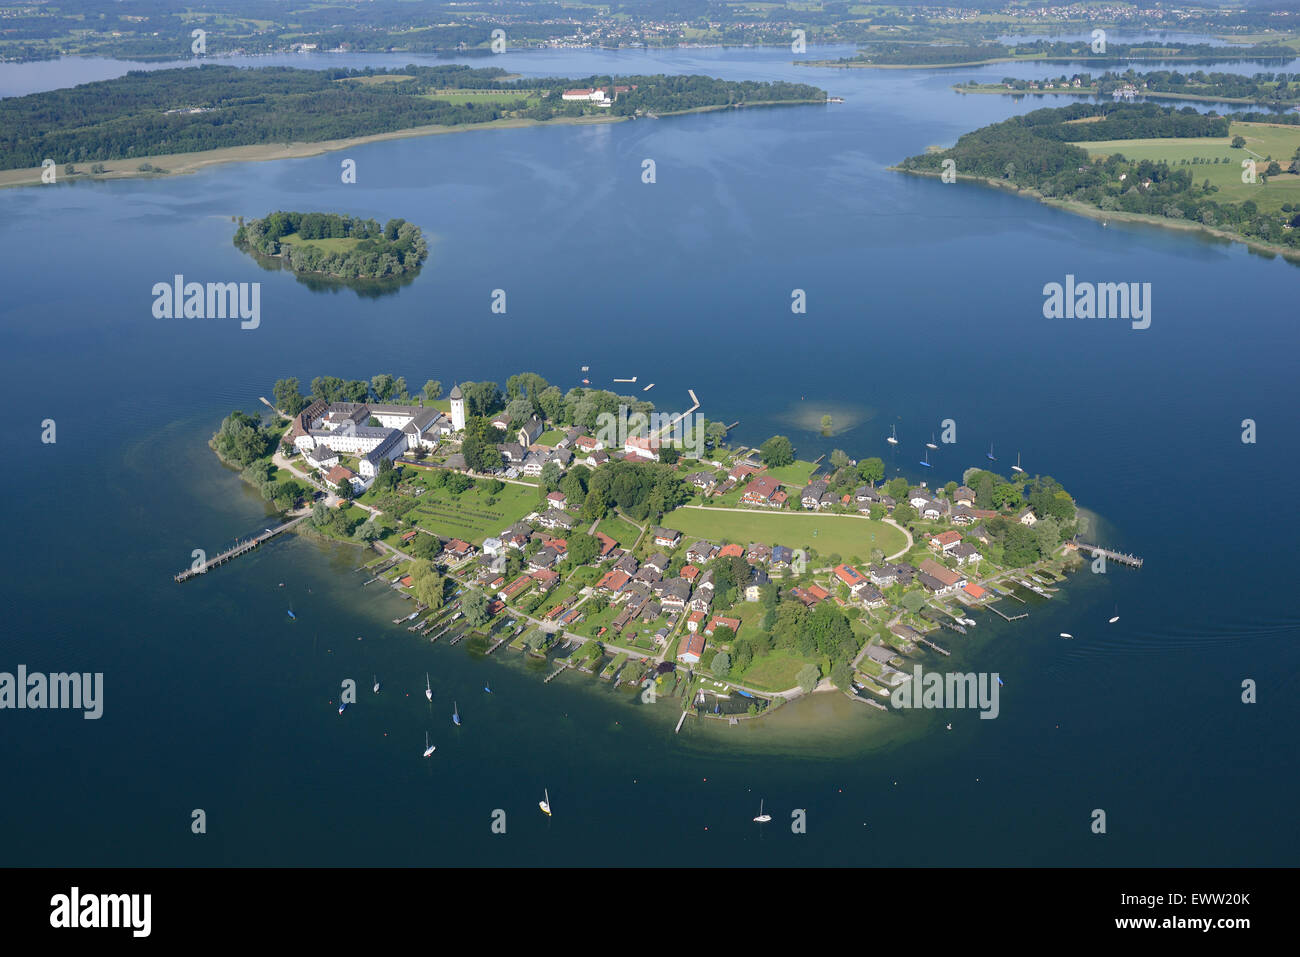 AERIAL VIEW. Frauenchiemsee (also known as Fraueninsel) Island. Lake Chiemsee, Bavaria, Germany. Stock Photo